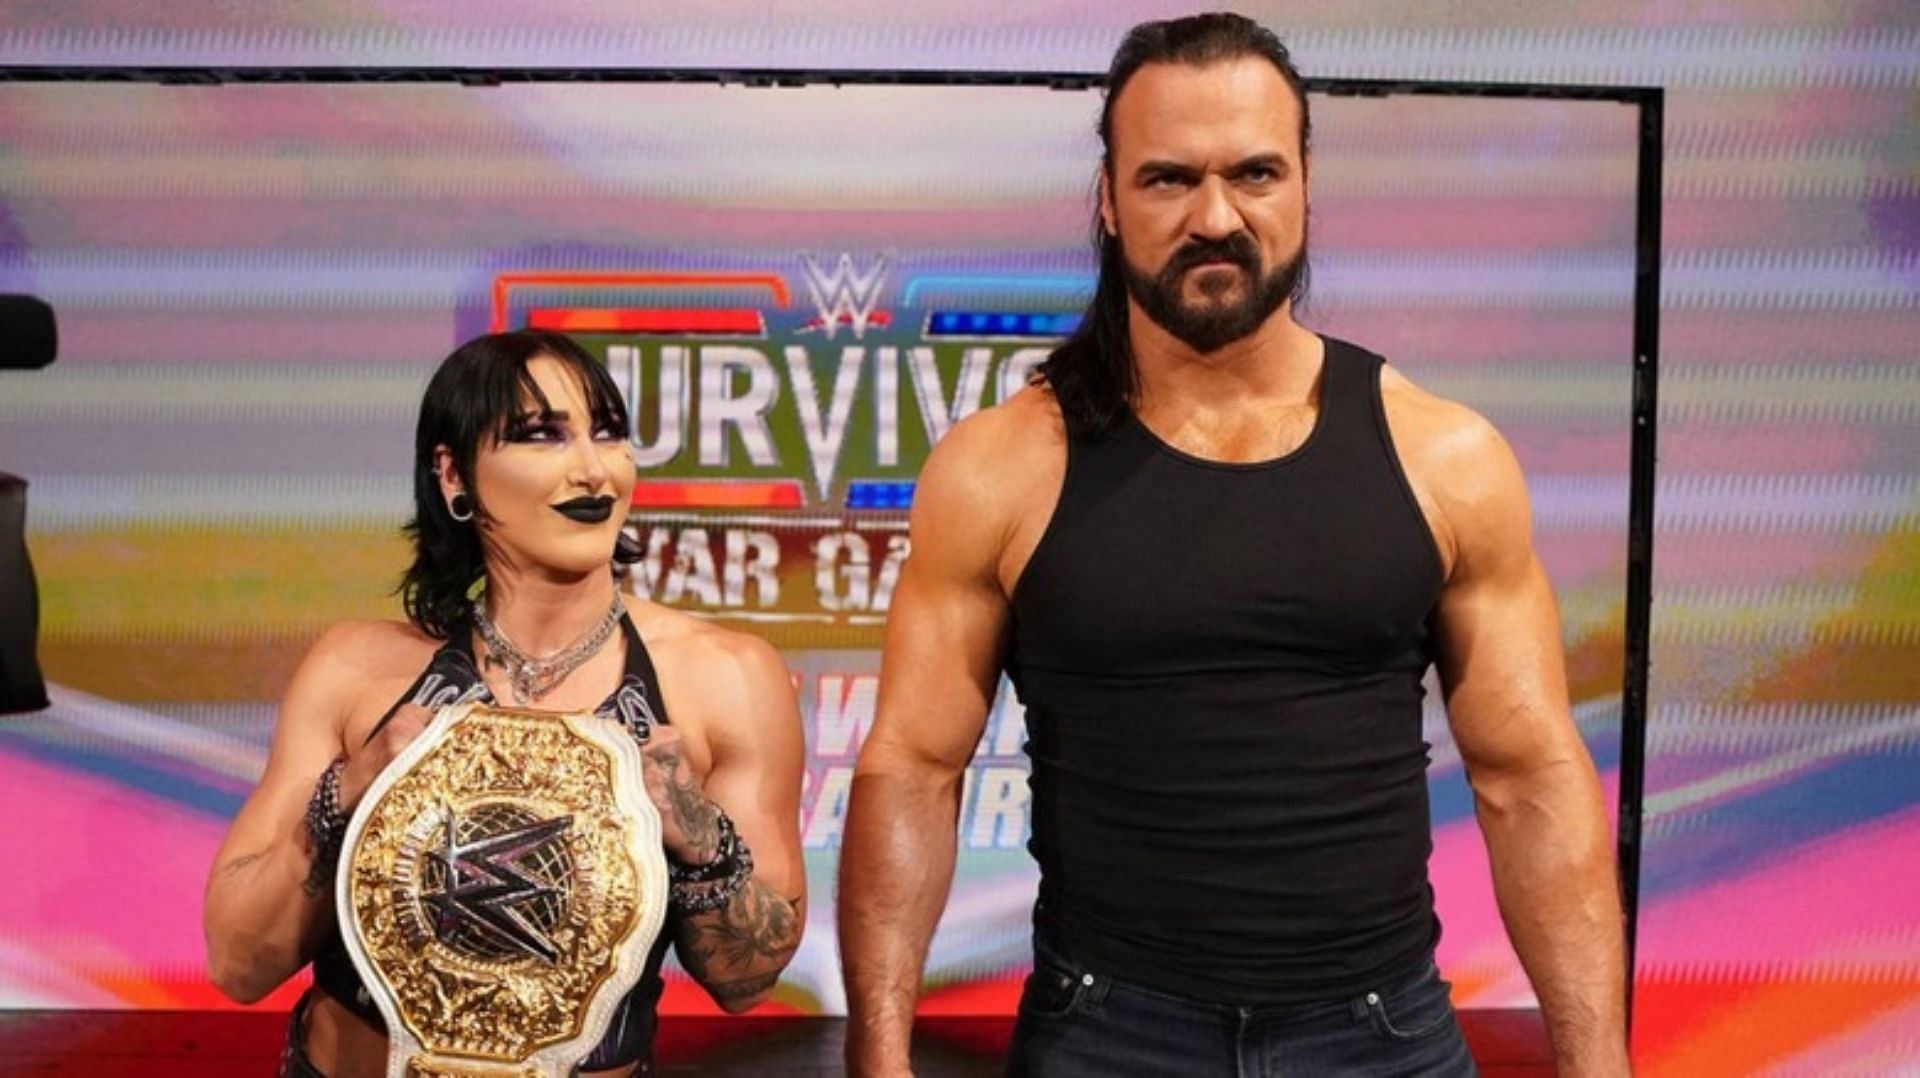 Drew McIntyre joined forces with Rhea Ripley on RAW